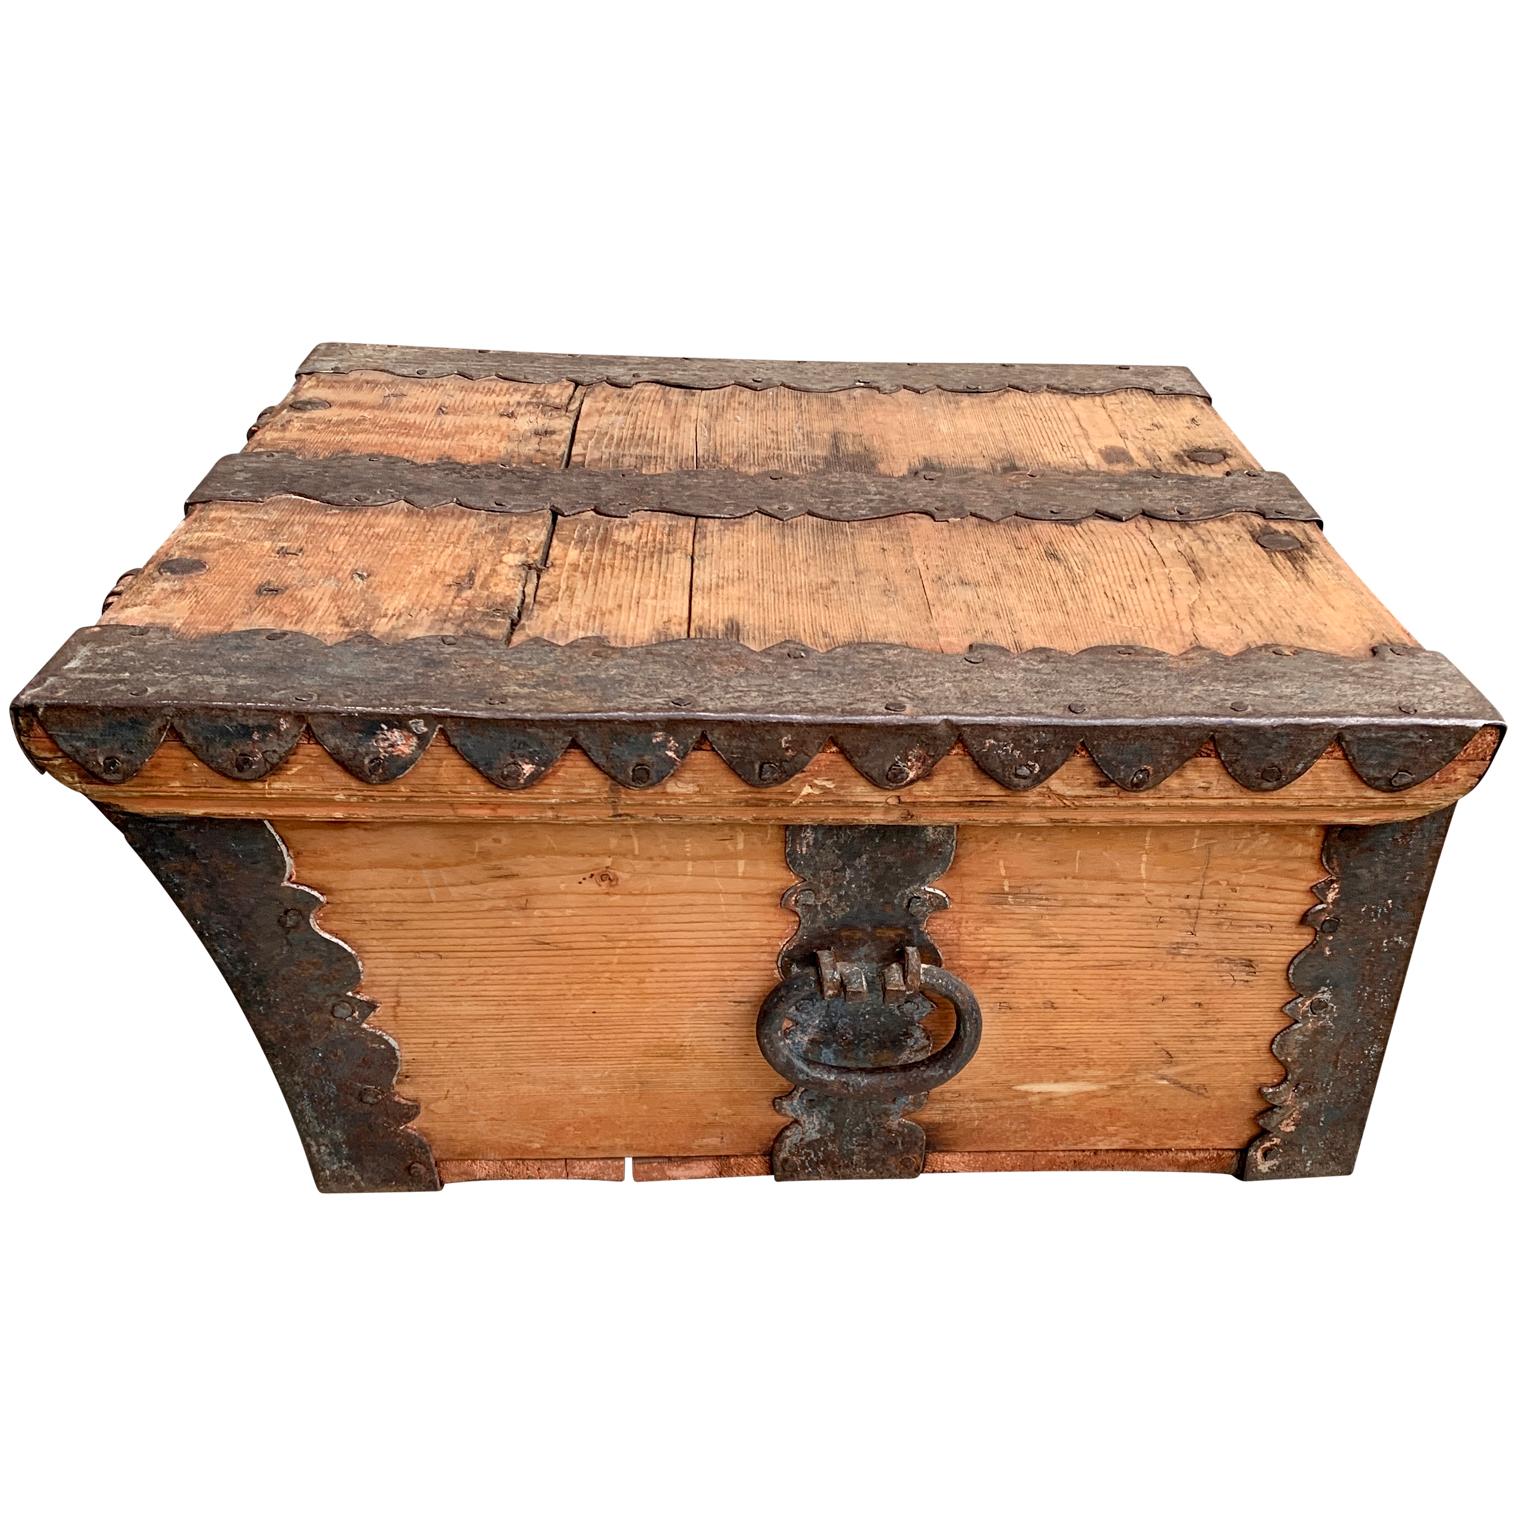 Baroque Scandinavian 18th Century Wooden Box, Dated 1752 For Sale